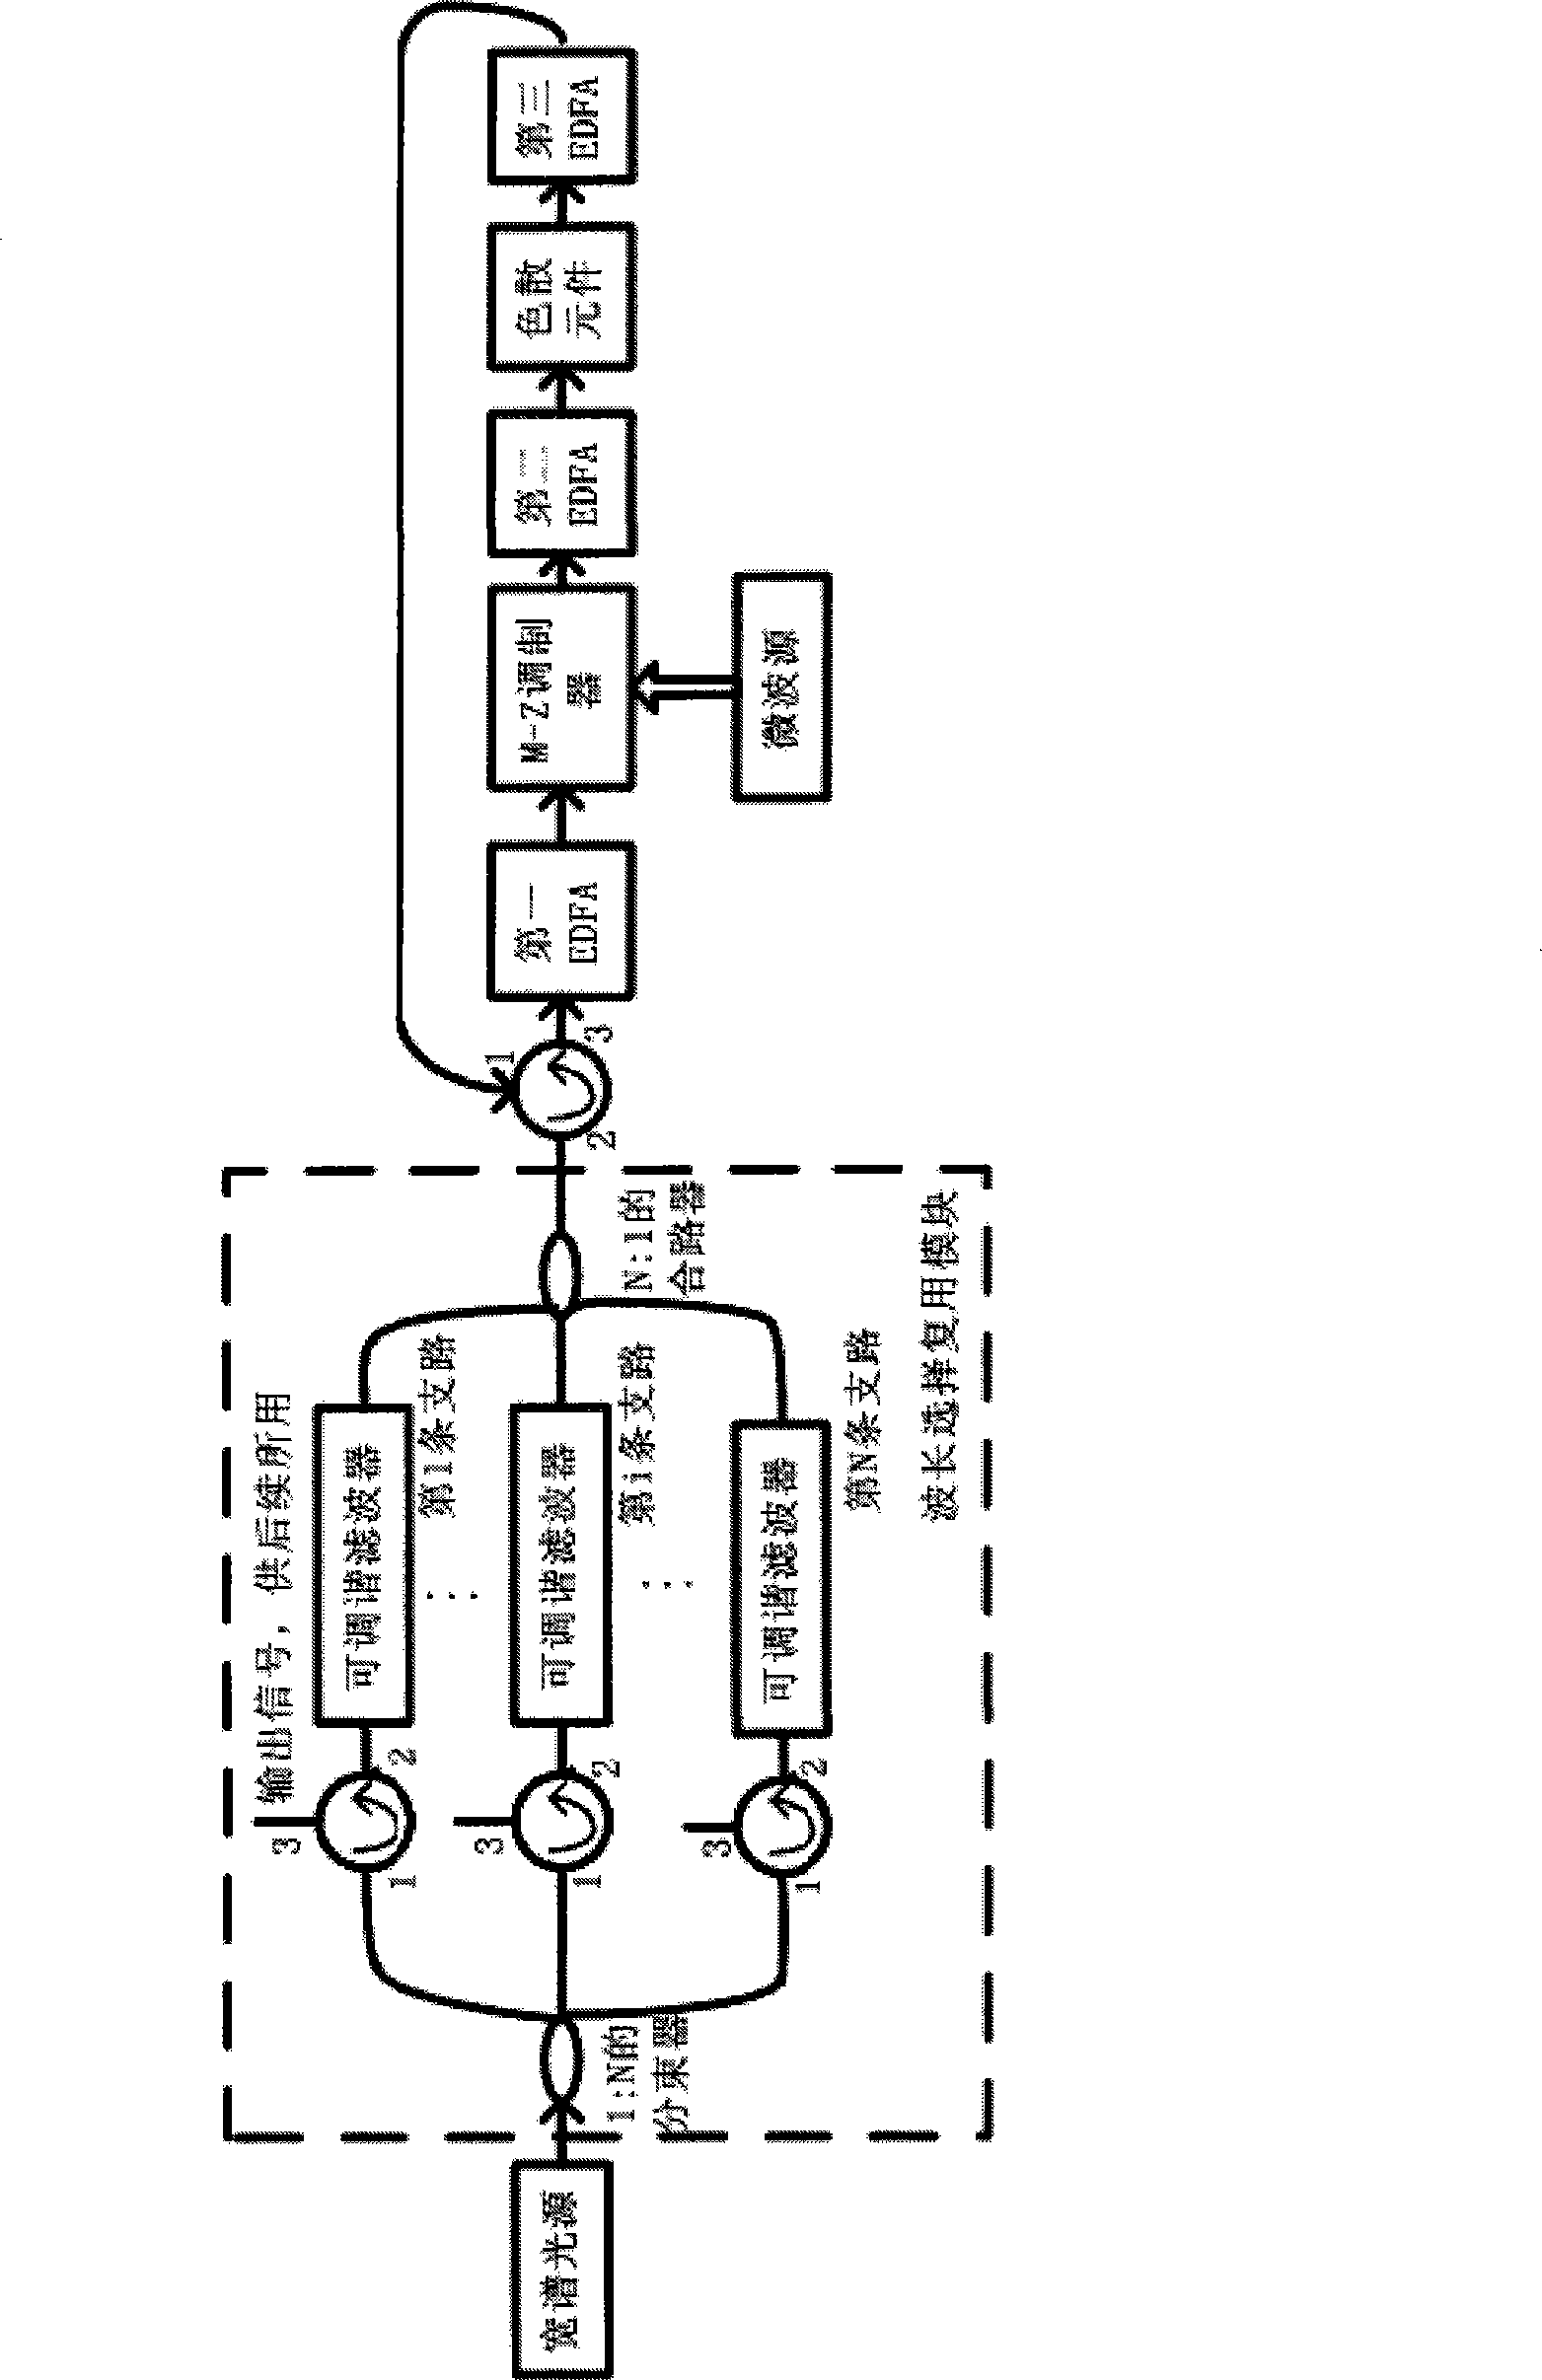 Network formed by filter feedback multiplexed millimeter wave subcarrier optical controlled microwave beam